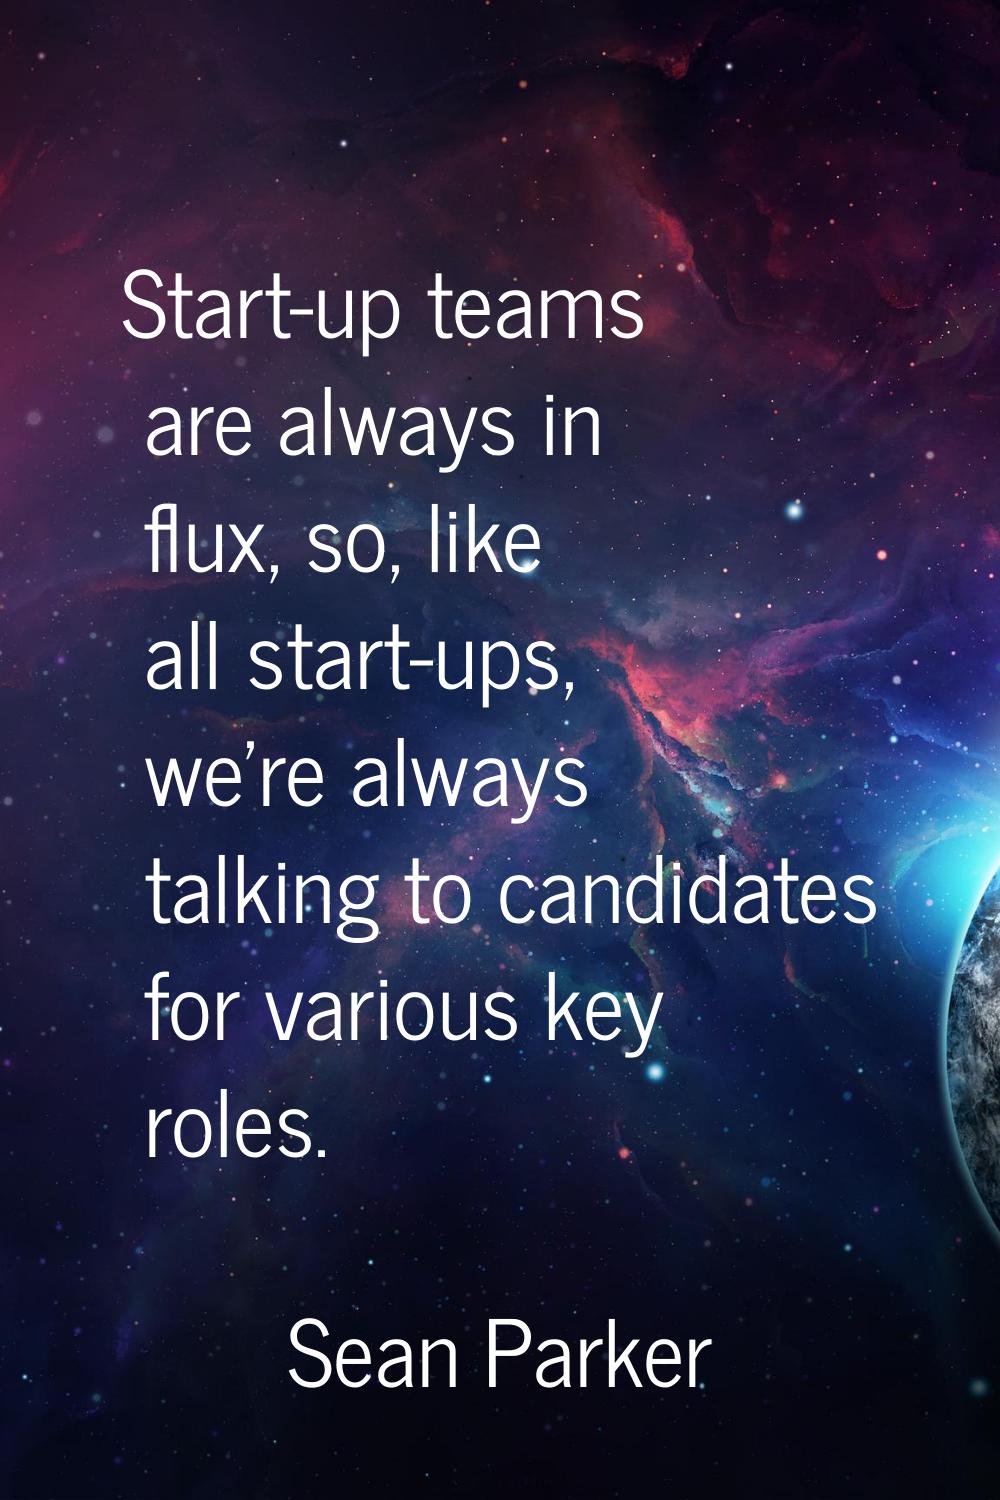 Start-up teams are always in flux, so, like all start-ups, we're always talking to candidates for v